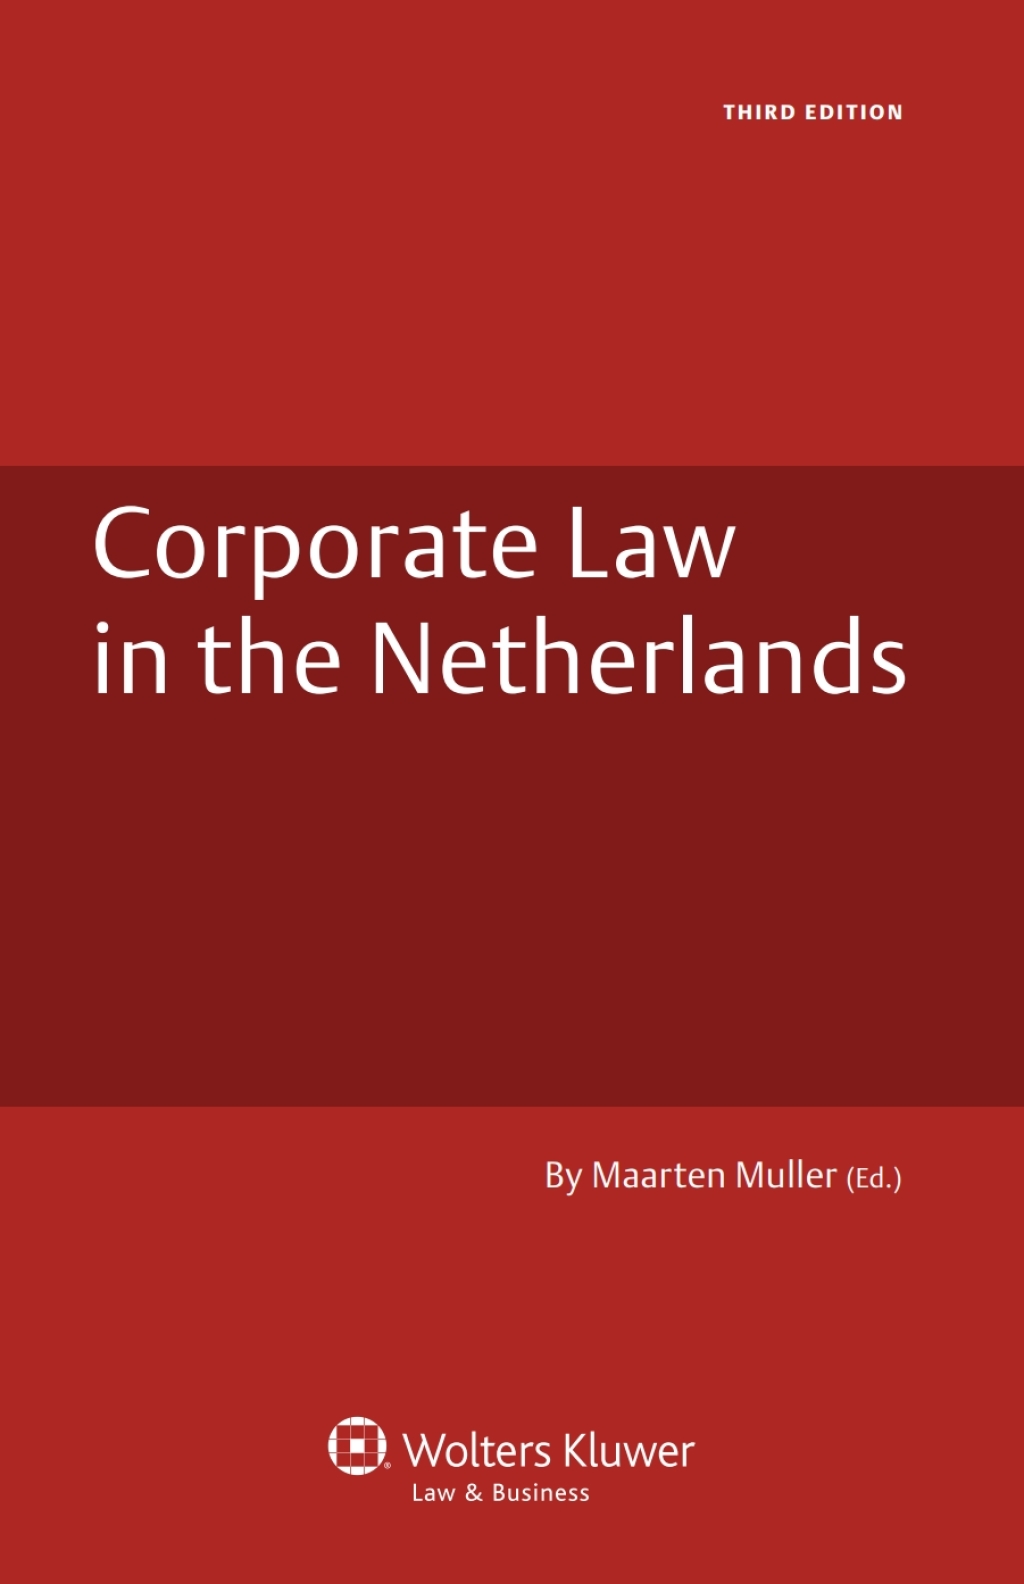 Corporate Law in the Netherlands - 3rd Edition (eBook Rental)